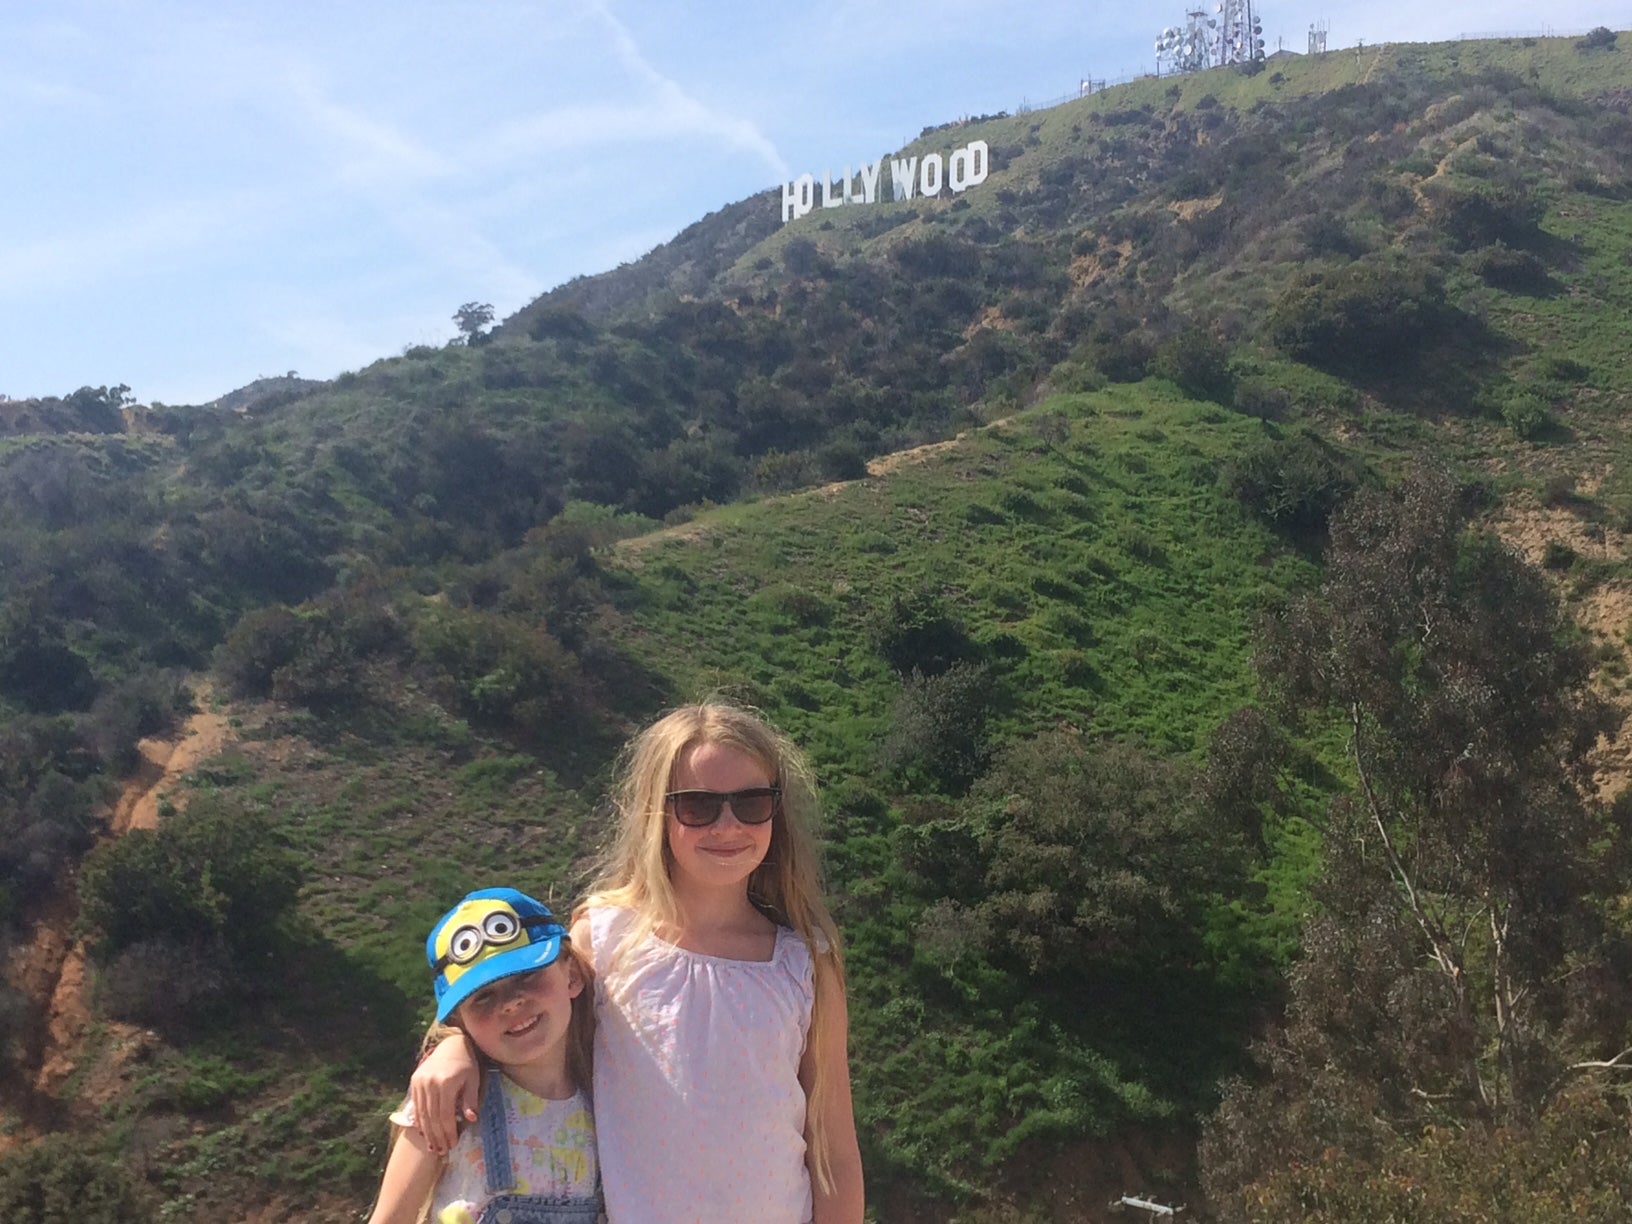 The kids enjoyed the famous Hollywood sign